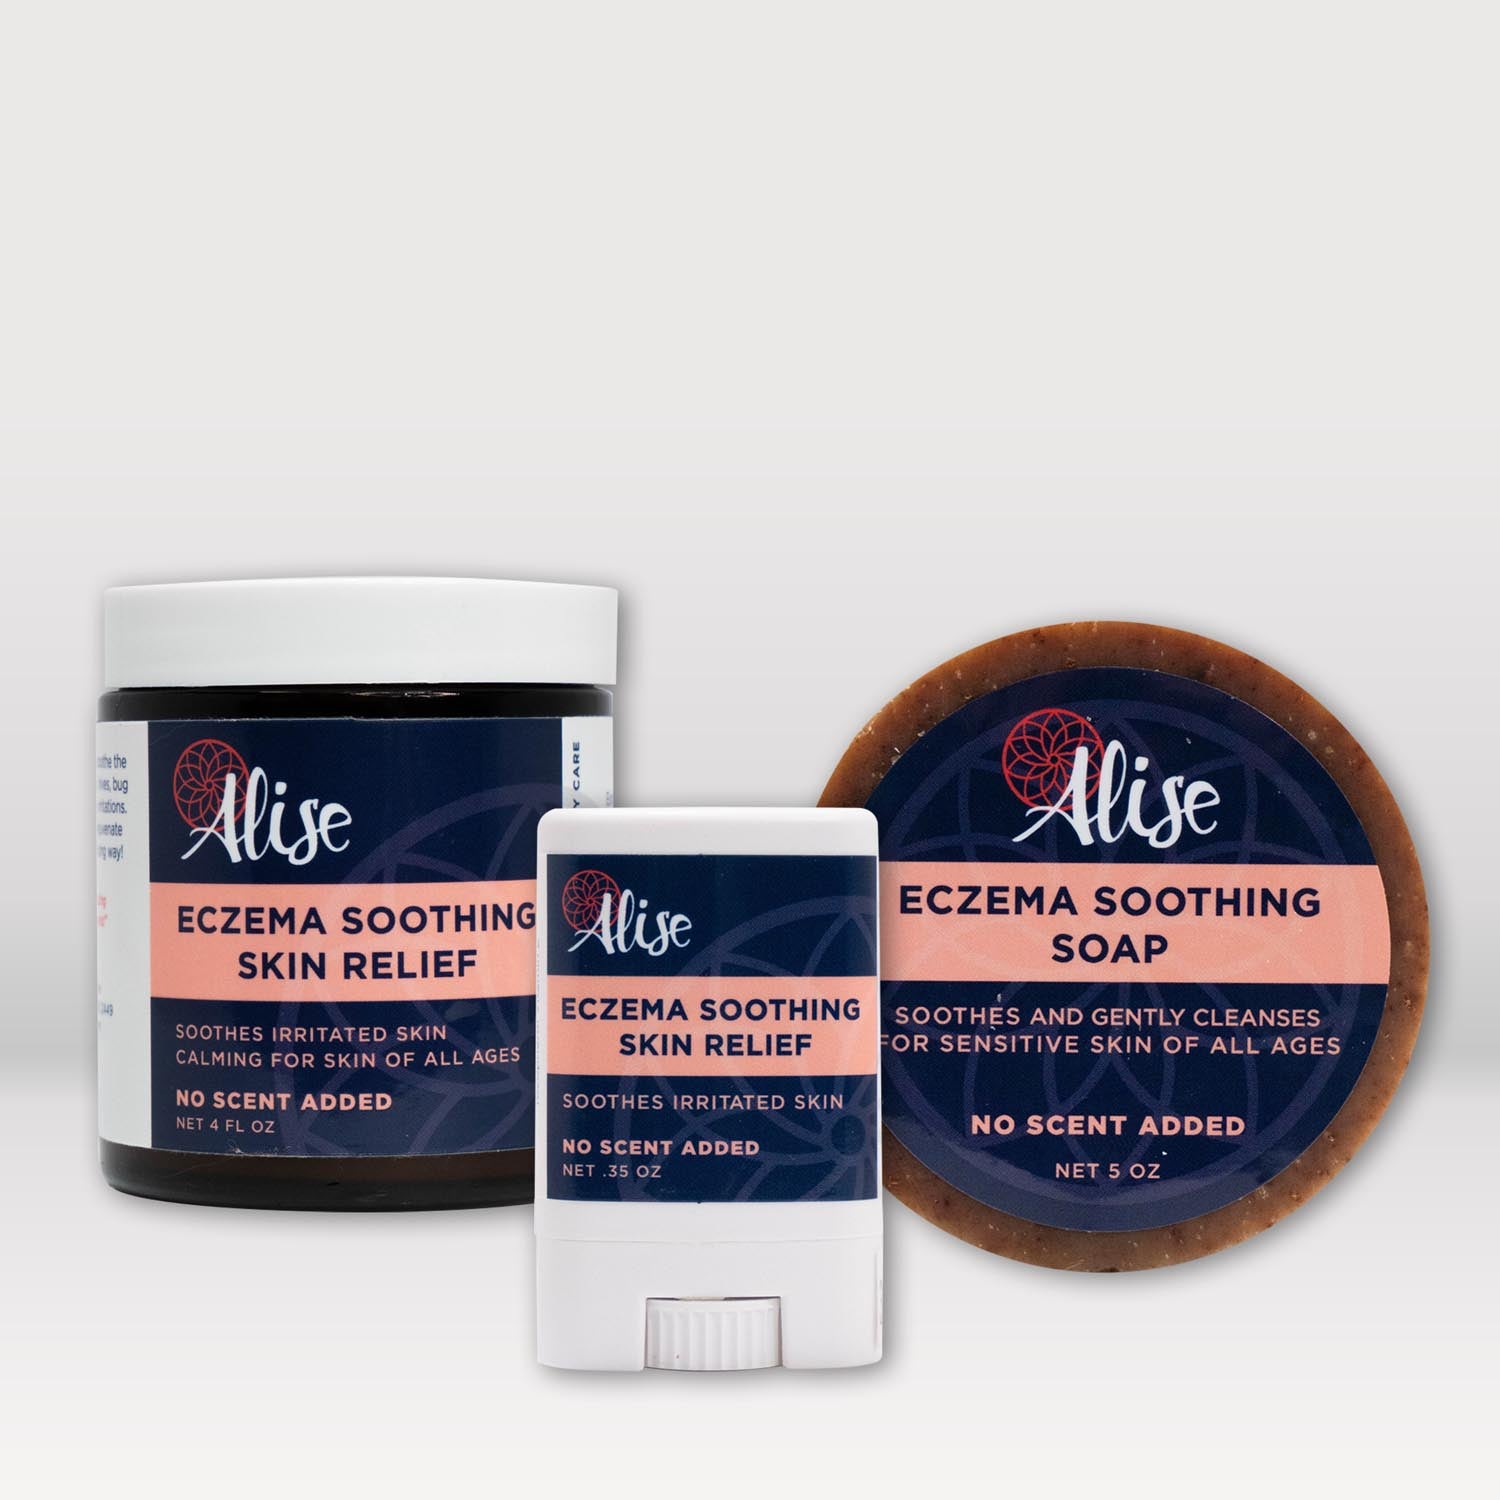 Eczema Soothing Skin Relief Gift Set handcrafted by Alise Body Care